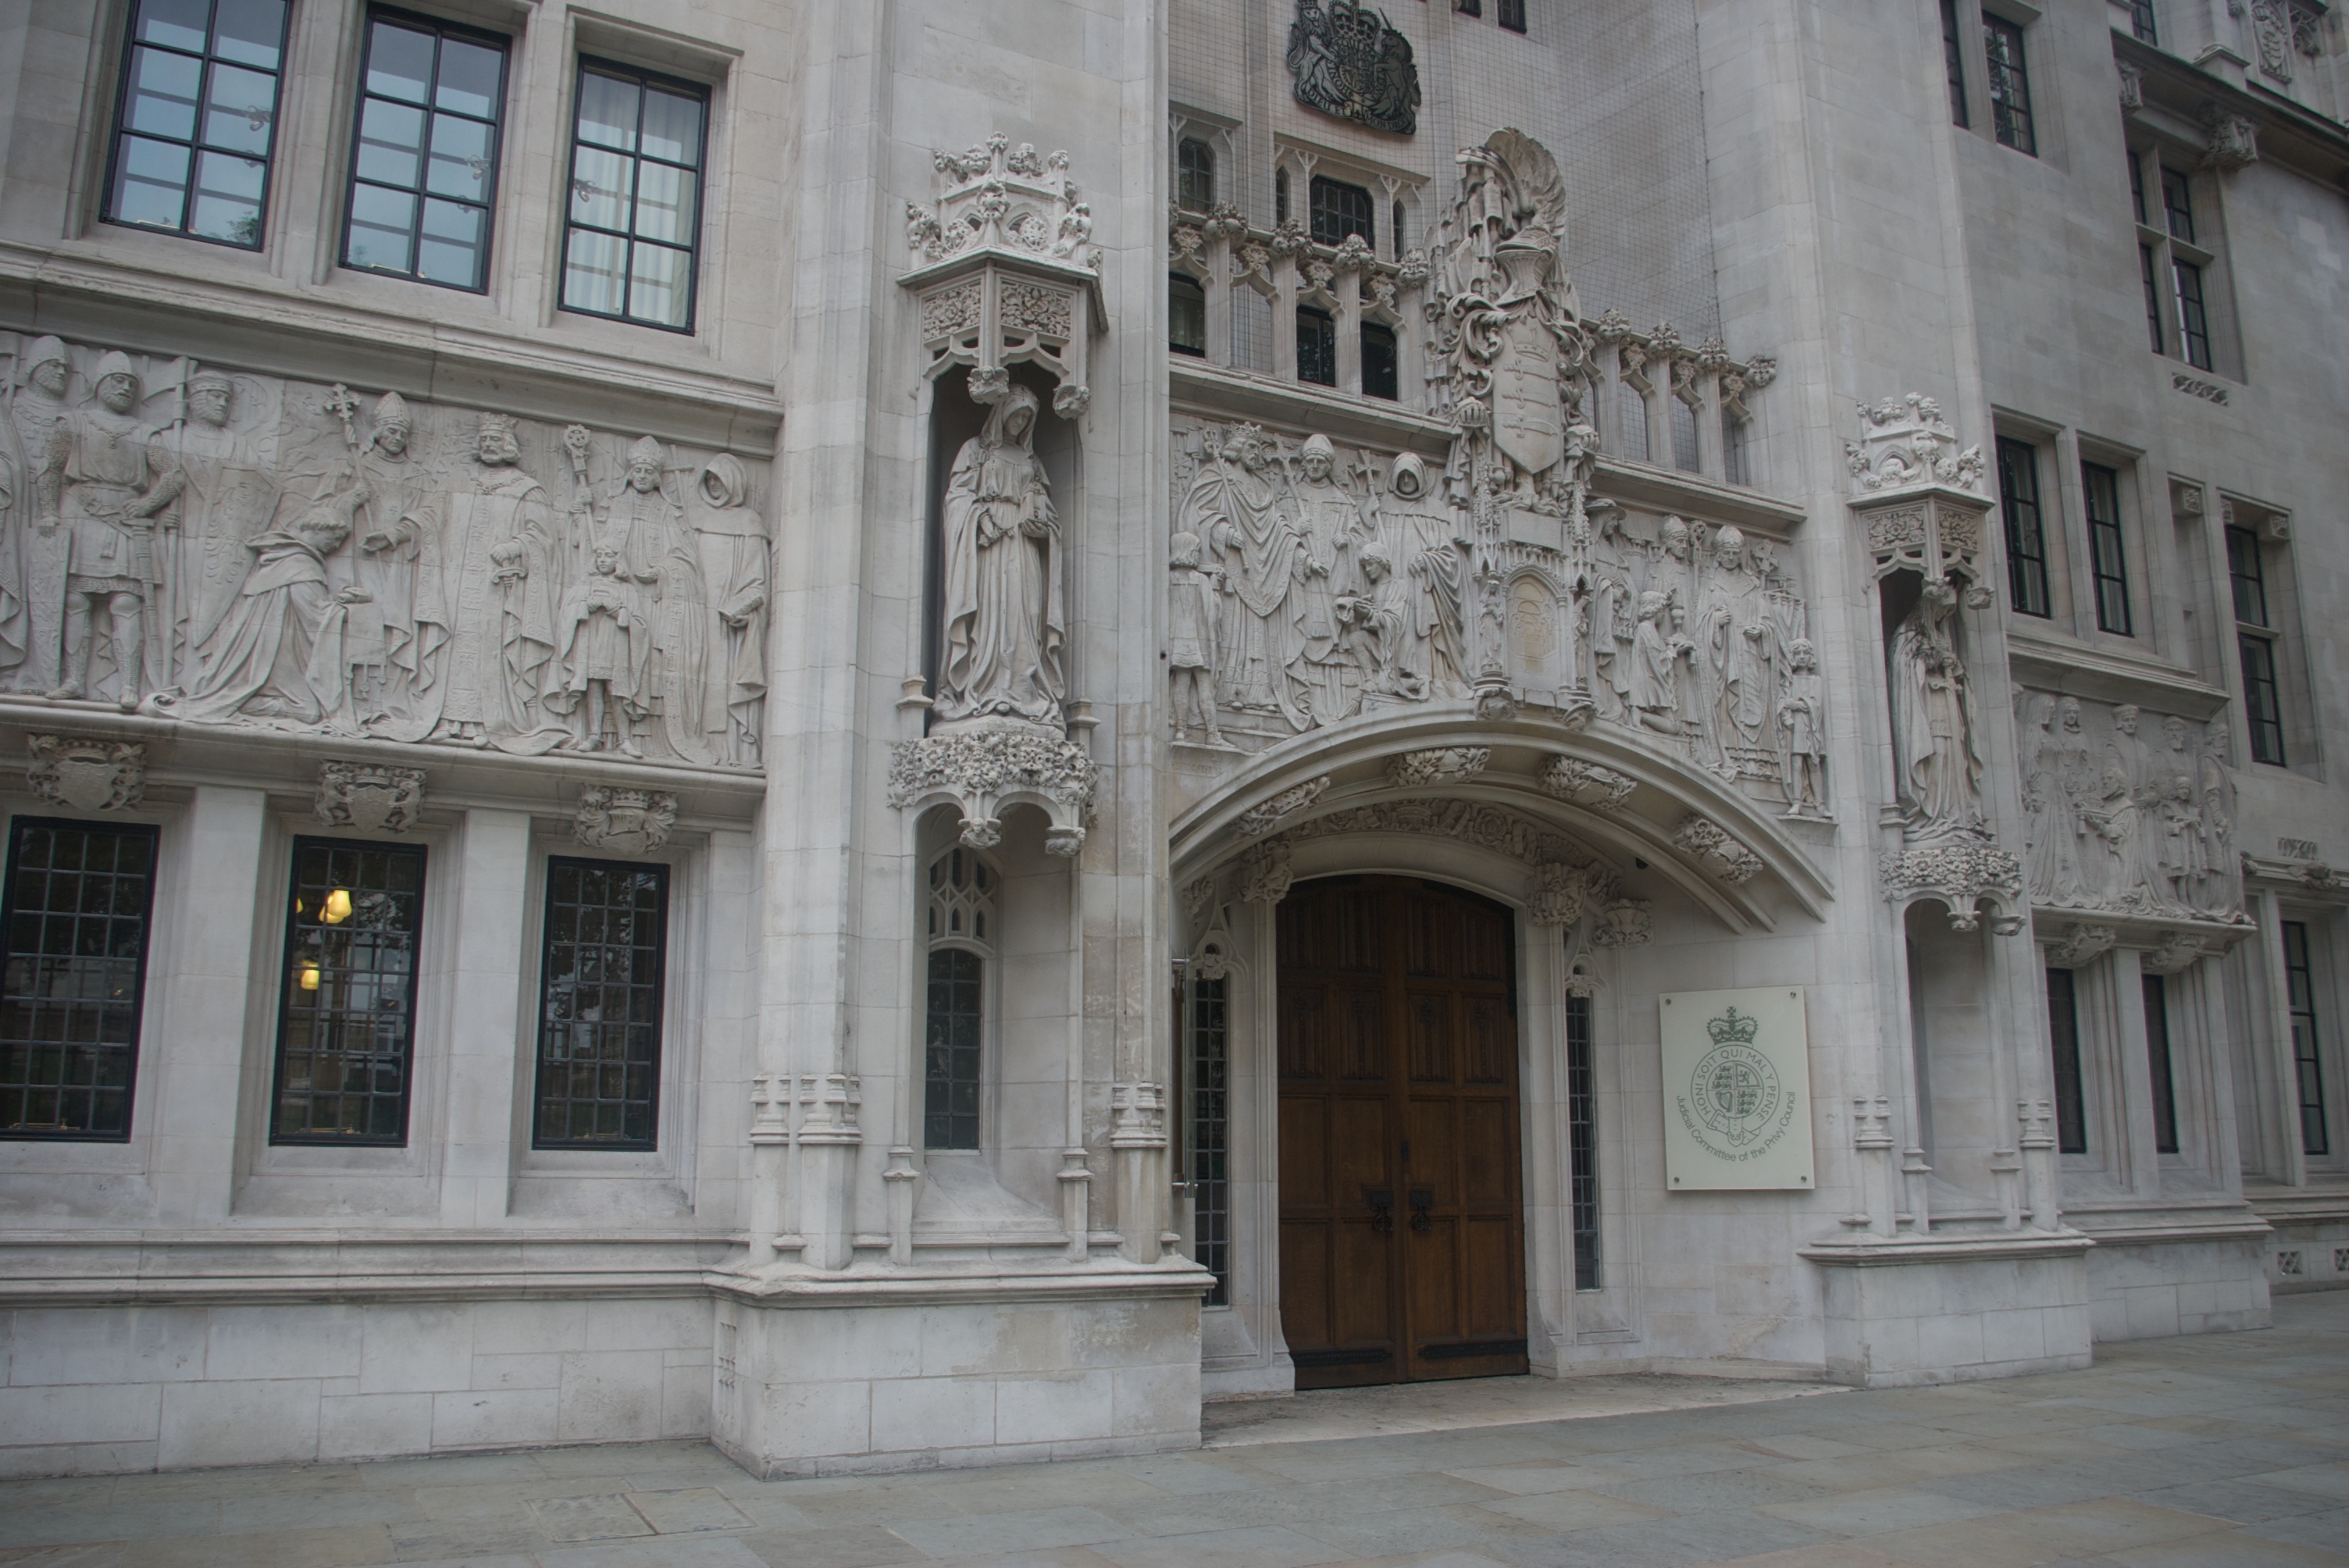 UK Supreme Court allows Nigerian lawsuit against Shell over oil spills to proceed